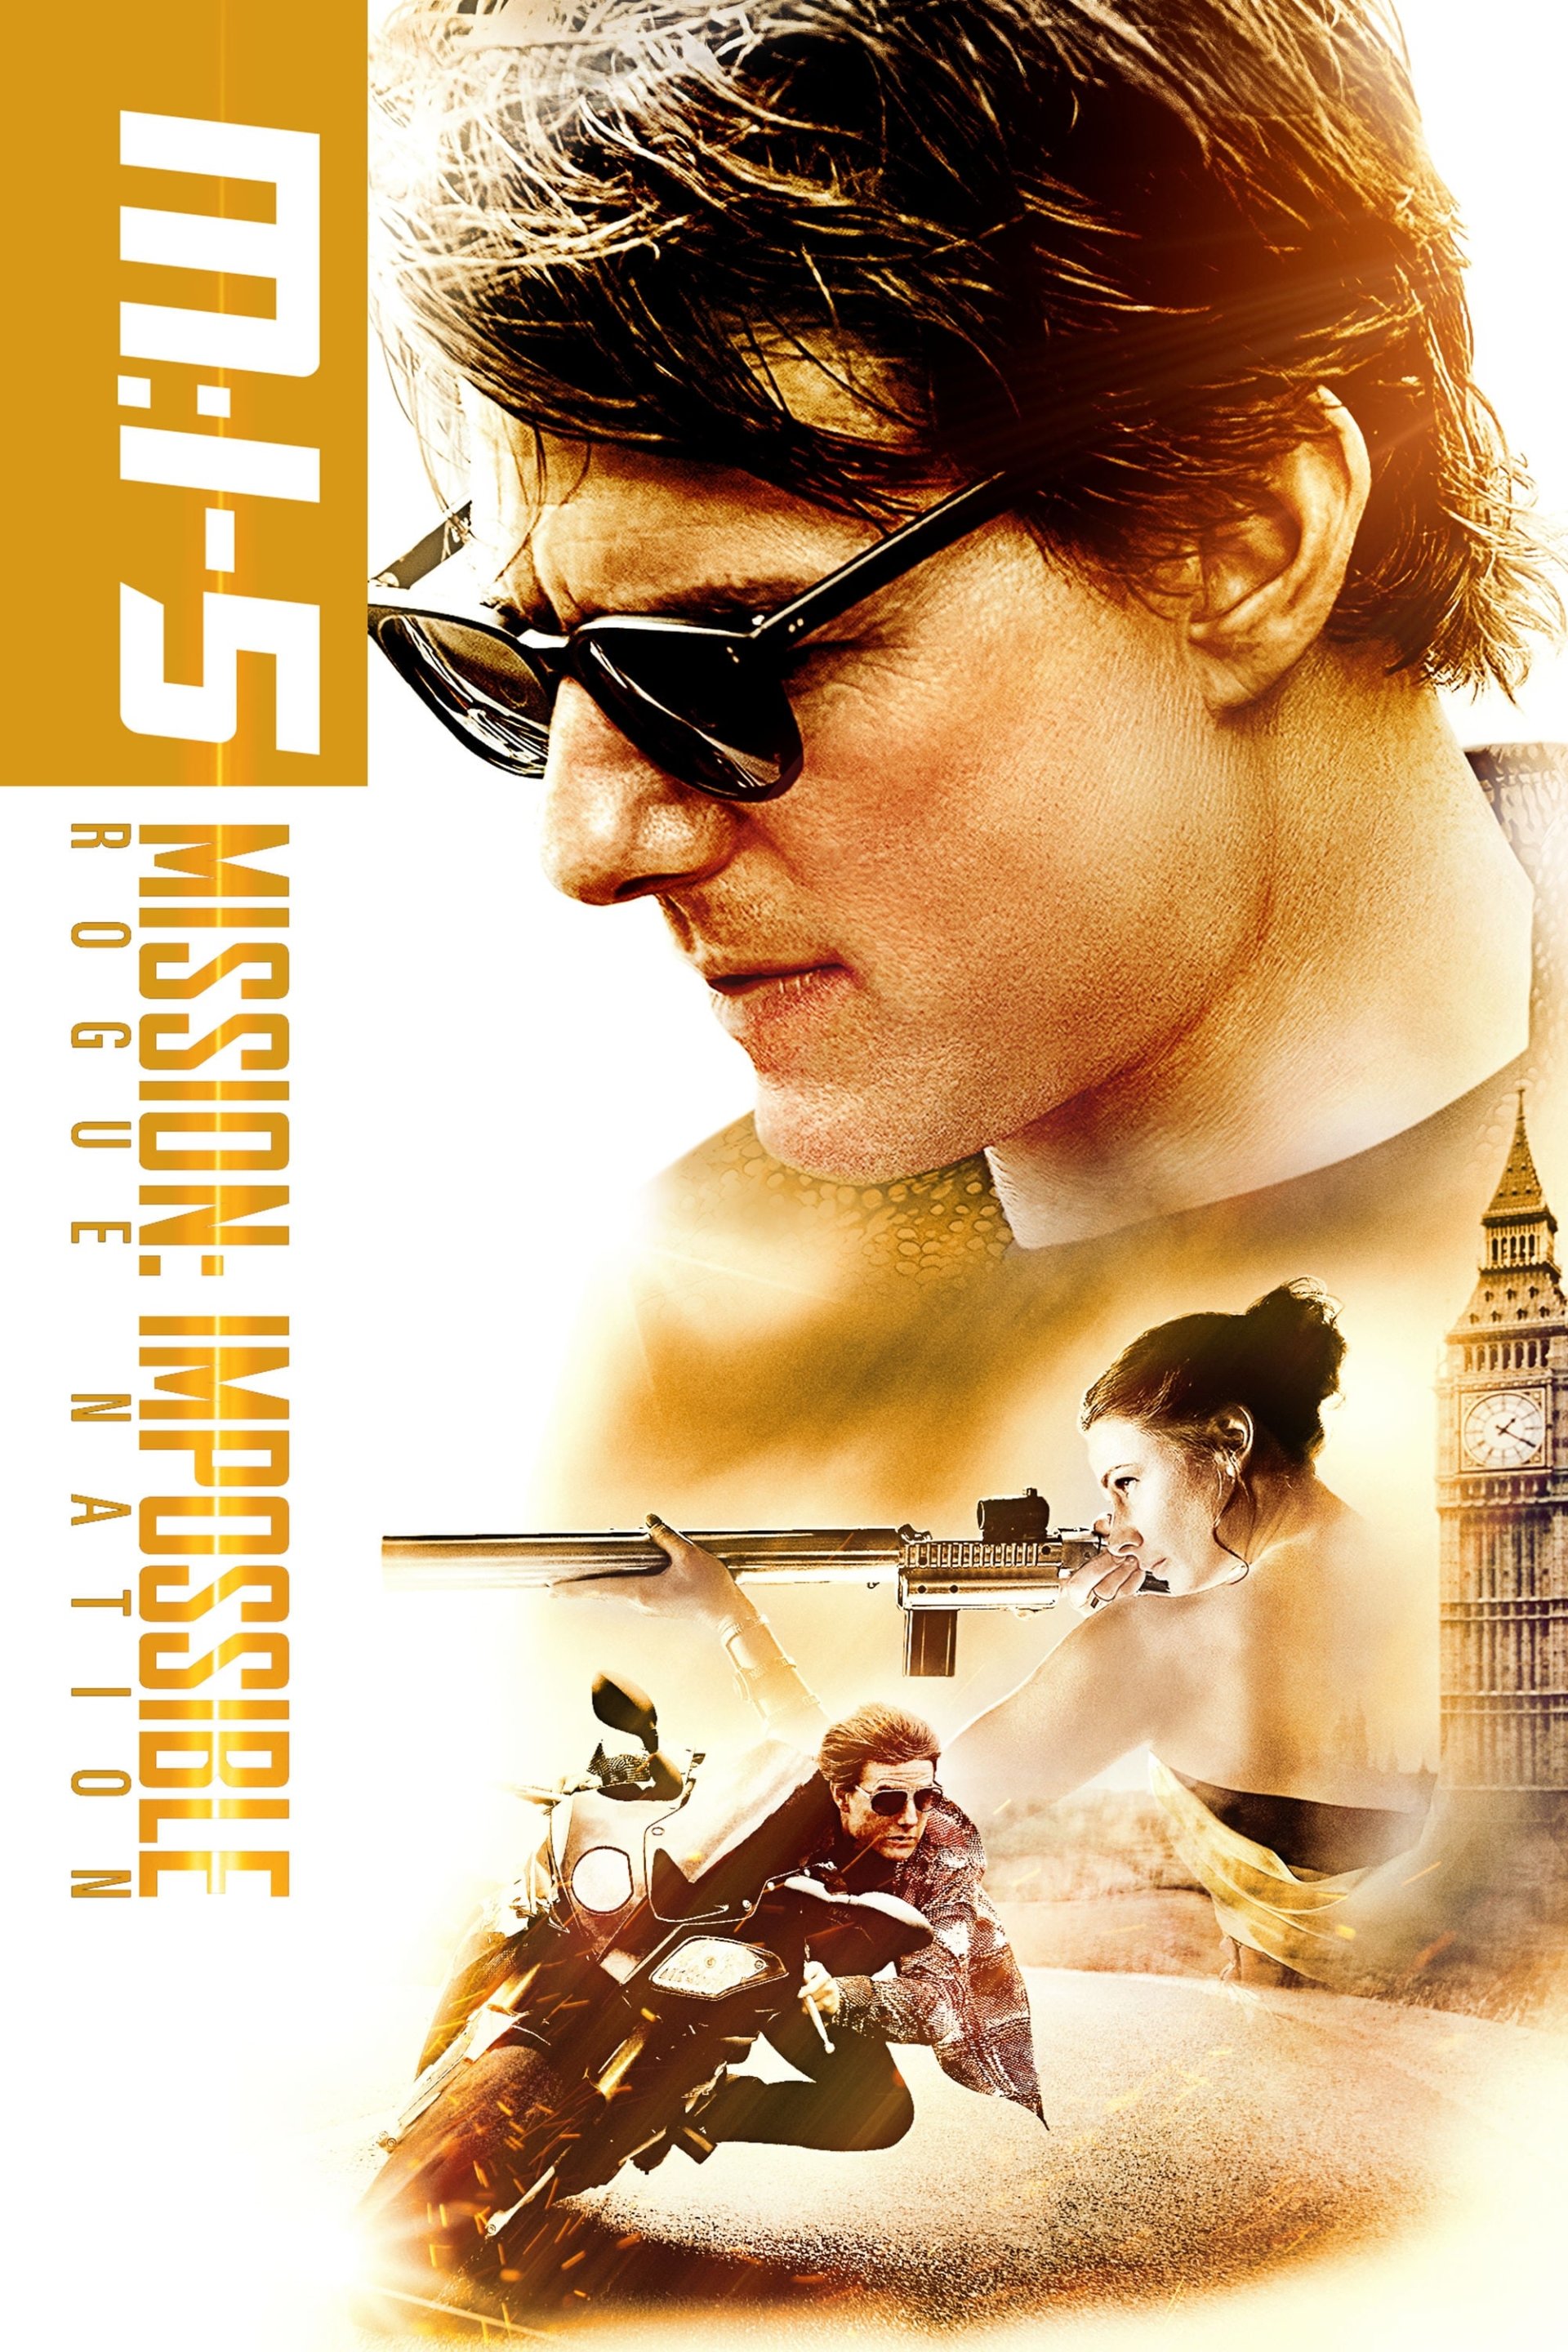 mission impossible 5 rogue full movie in hindi dubbed download 720p